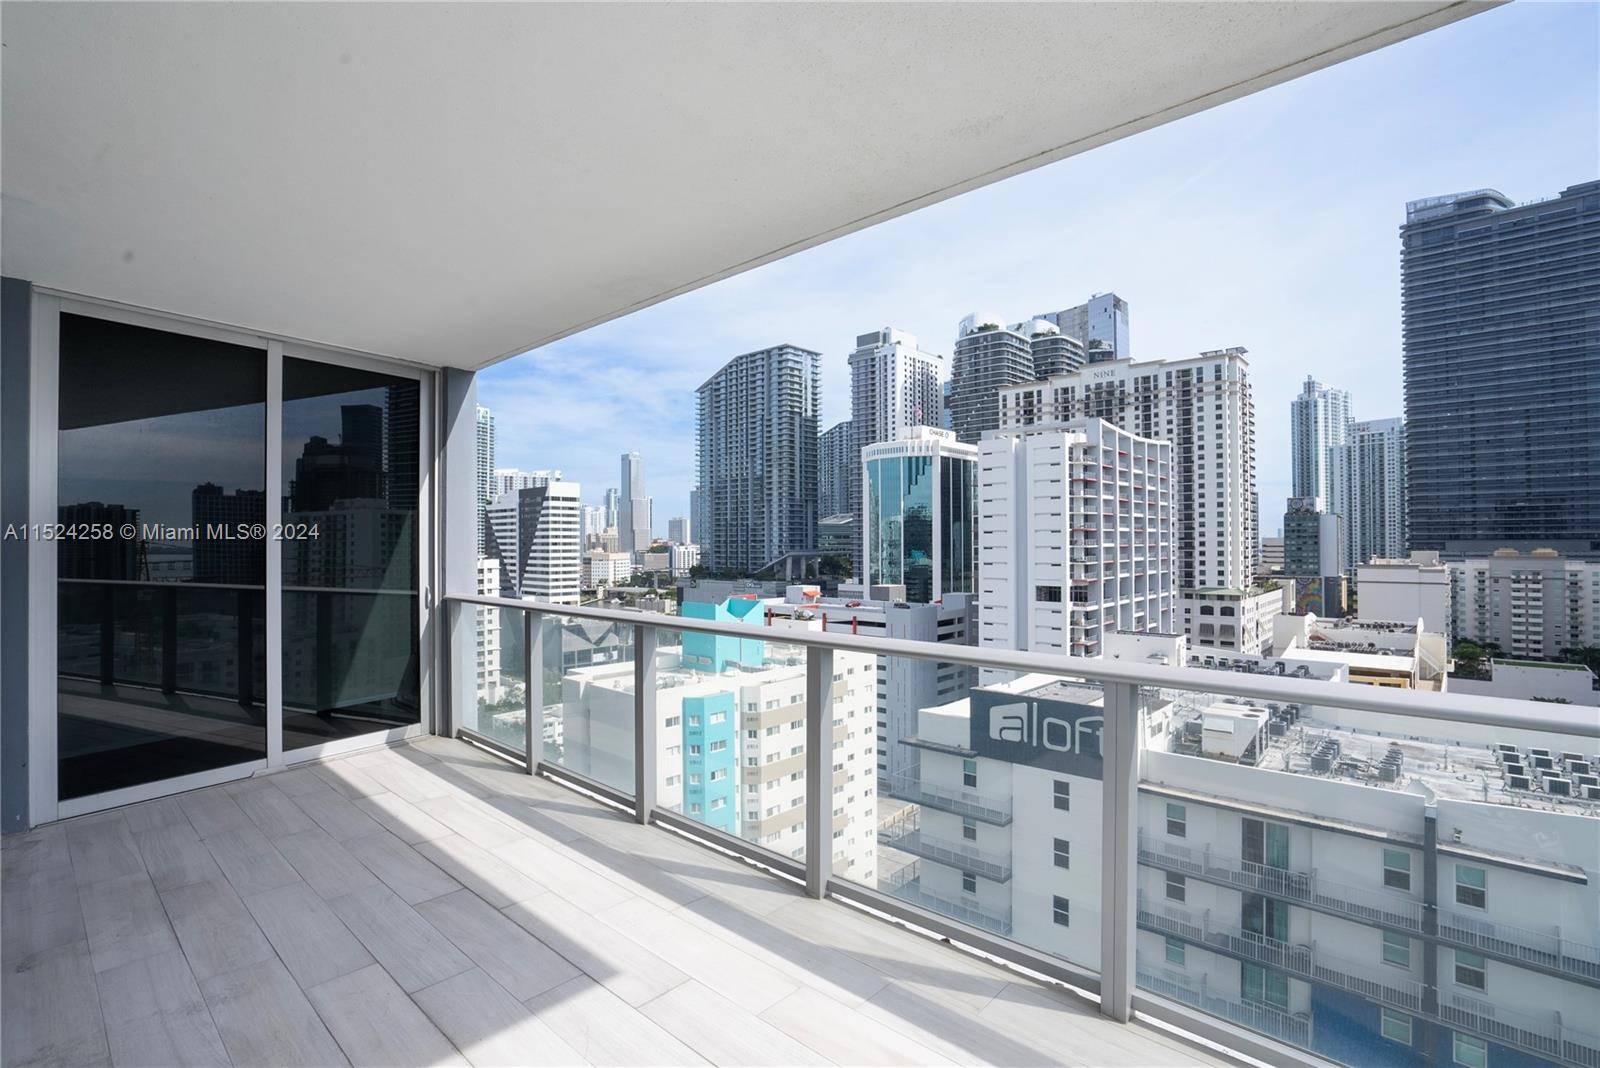 Don't lose this exceptional opportunity to own a luxurious apartment in the heart of Miami's vibrant Brickell district.